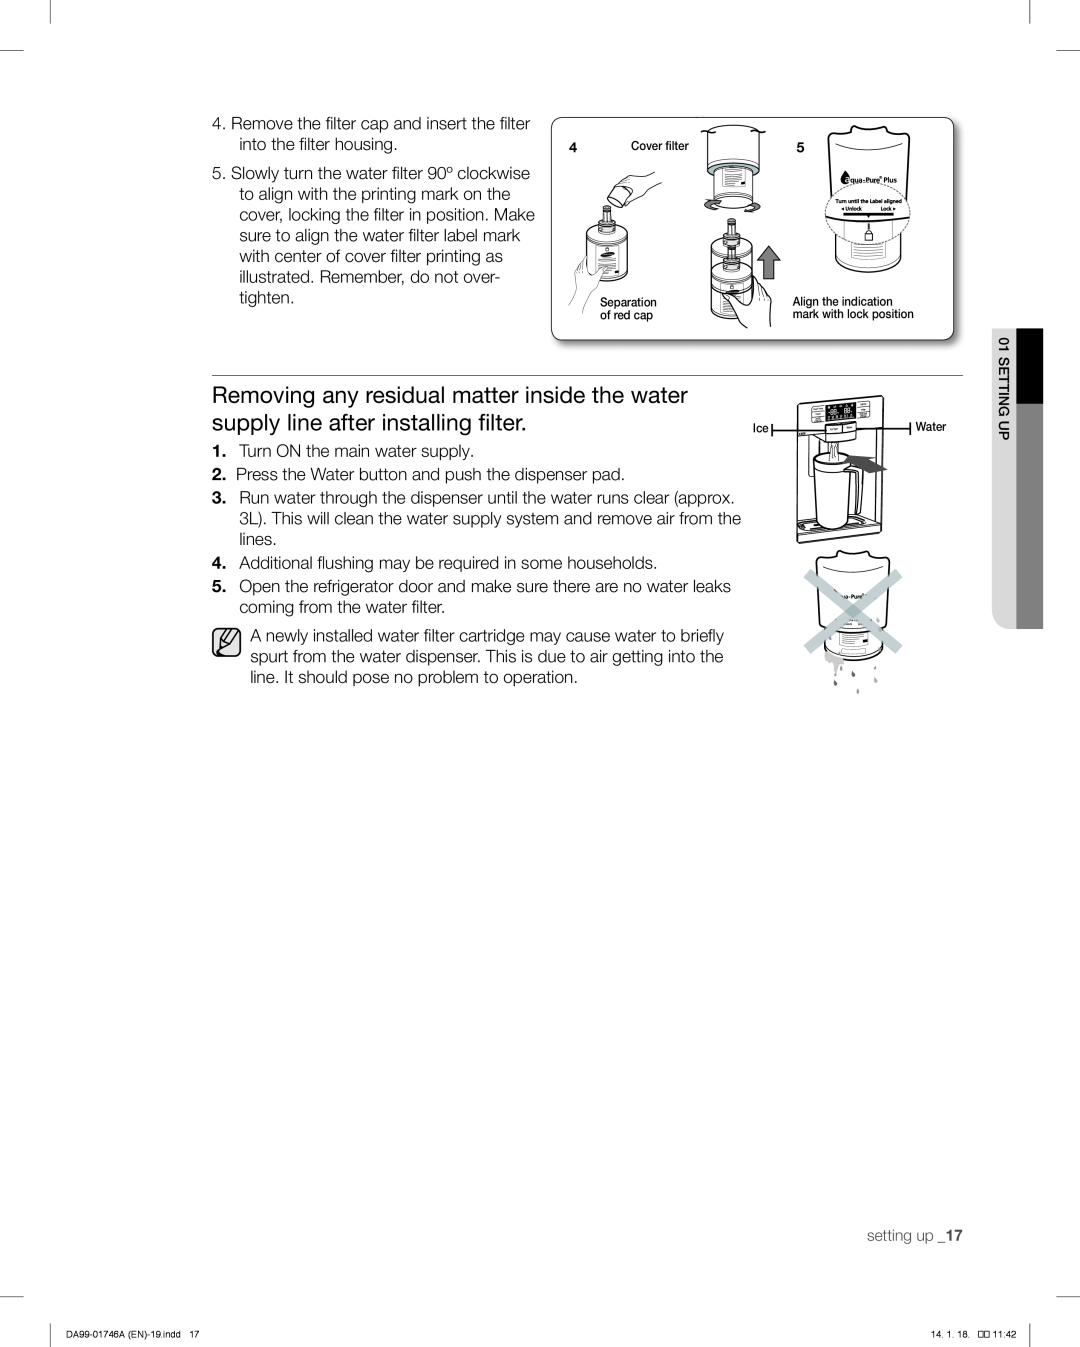 Samsung RSG257AA user manual Removing any residual matter inside the water, supply line after installing filter 